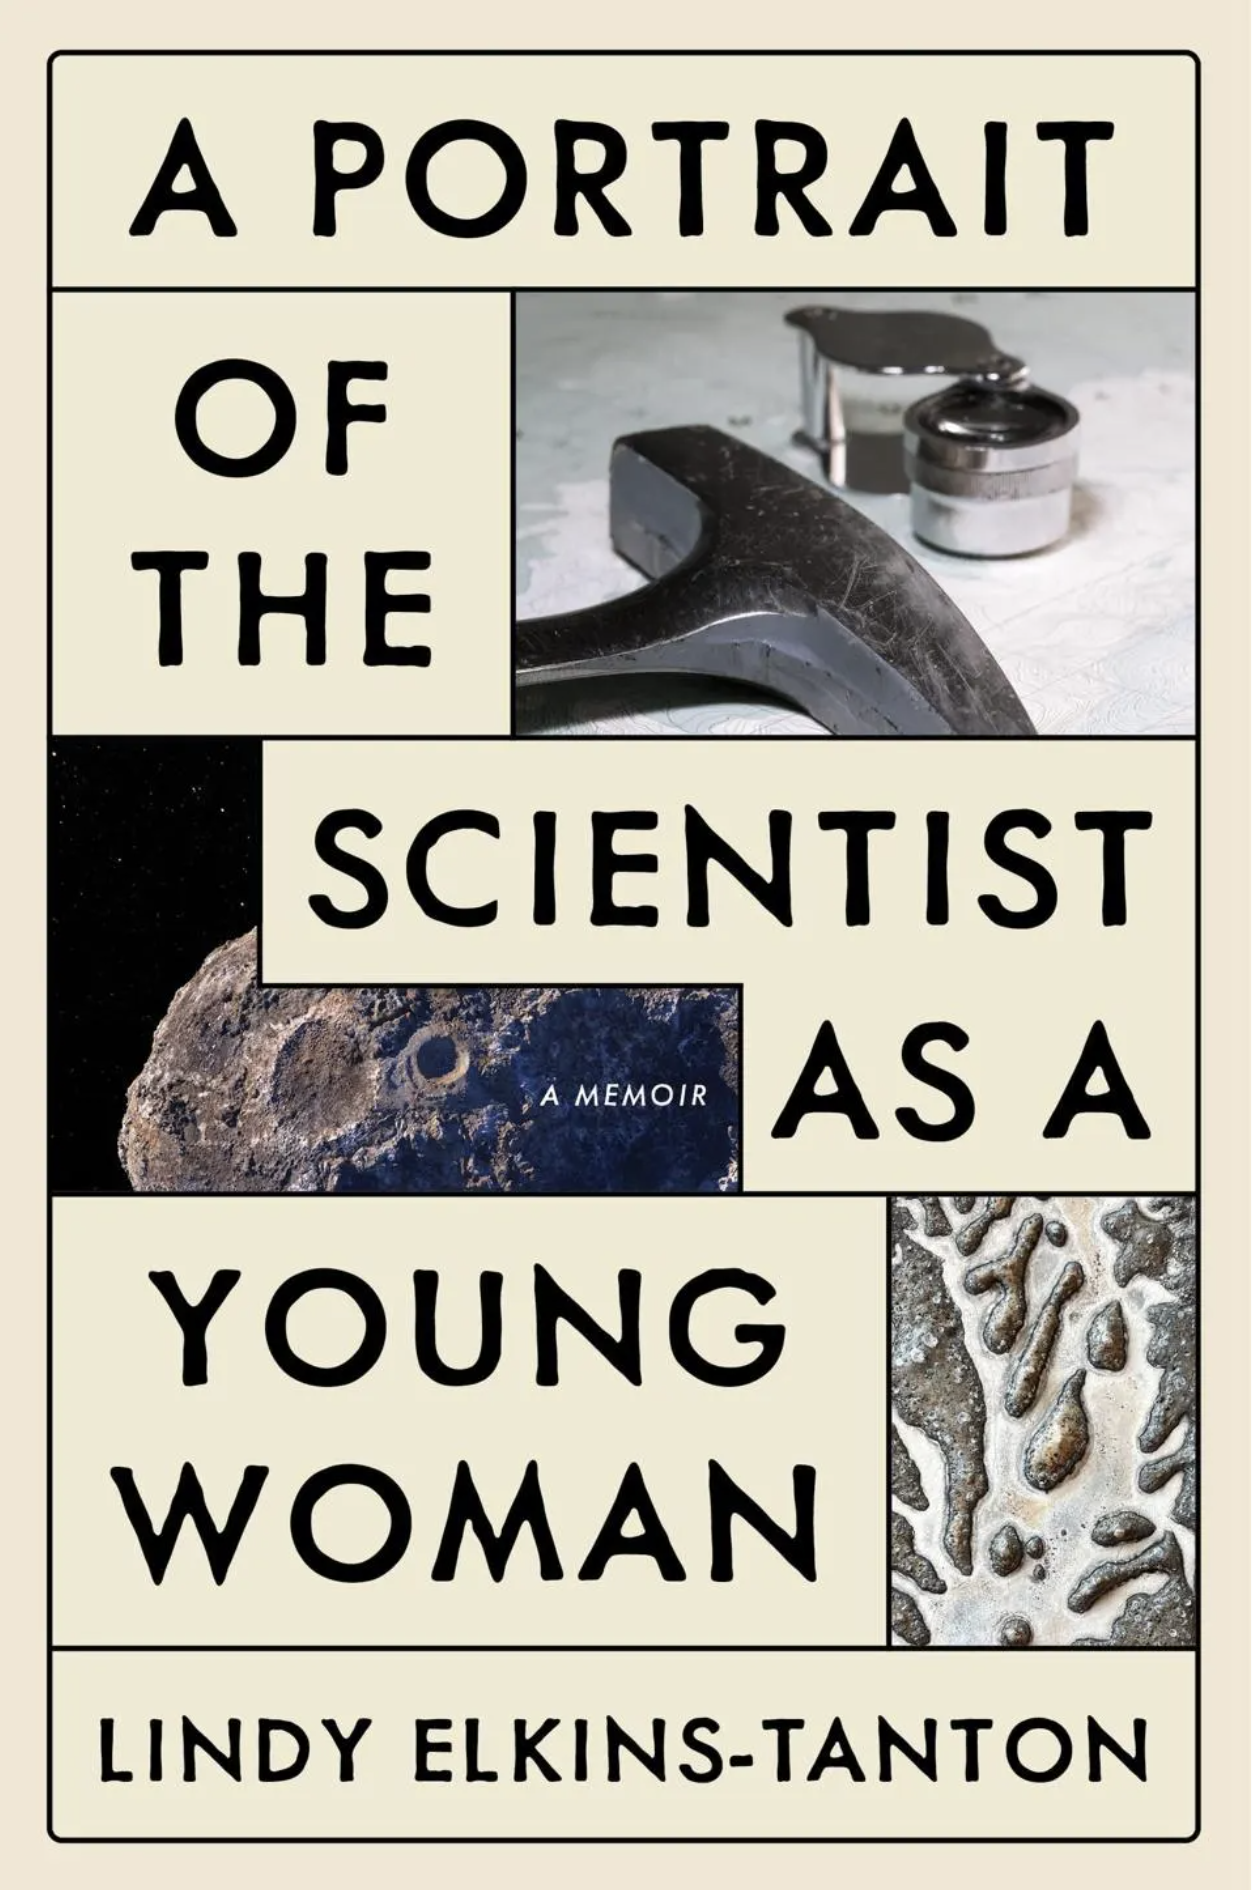 Summer Space Reading List: A Portrait of the Scientist as a Young Woman